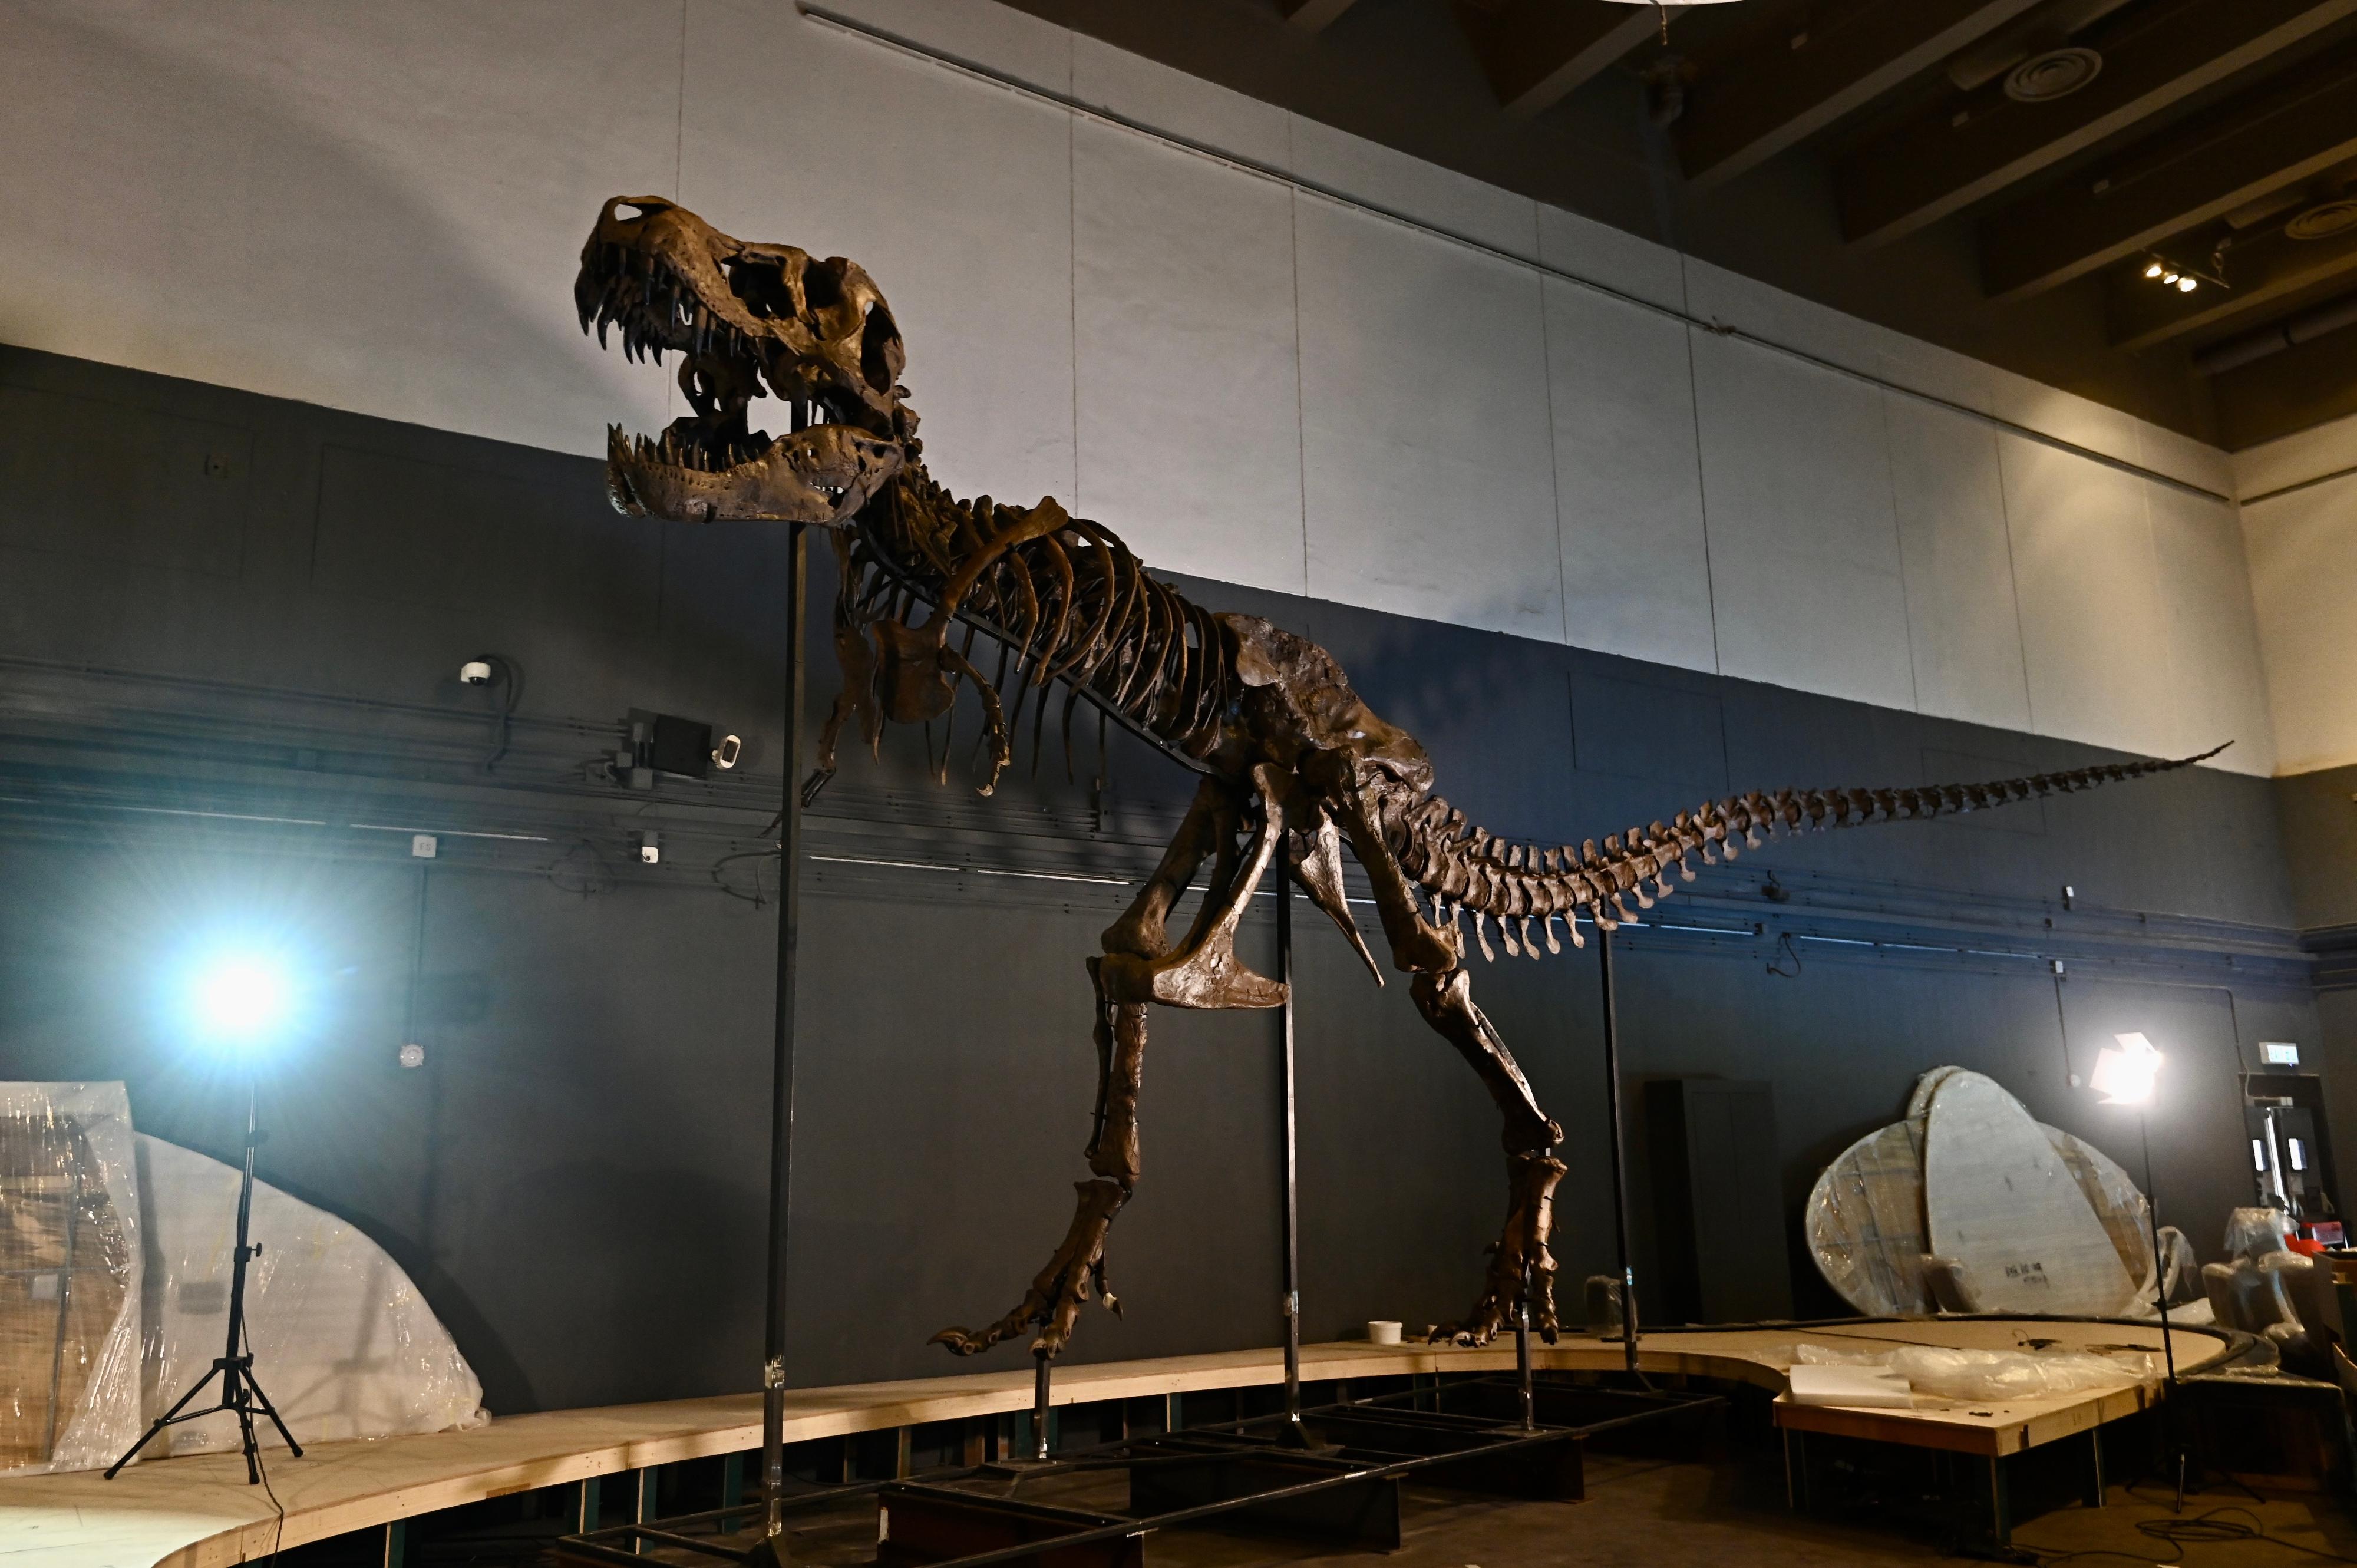 The Hong Kong Science Museum has started setting up exhibits for its large-scale dinosaur exhibition, "The Hong Kong Jockey Club Series: The Big Eight - Dinosaur Revelation", to be launched on July 8 (Friday). Picture shows the skeleton of a Tyrannosaurus.